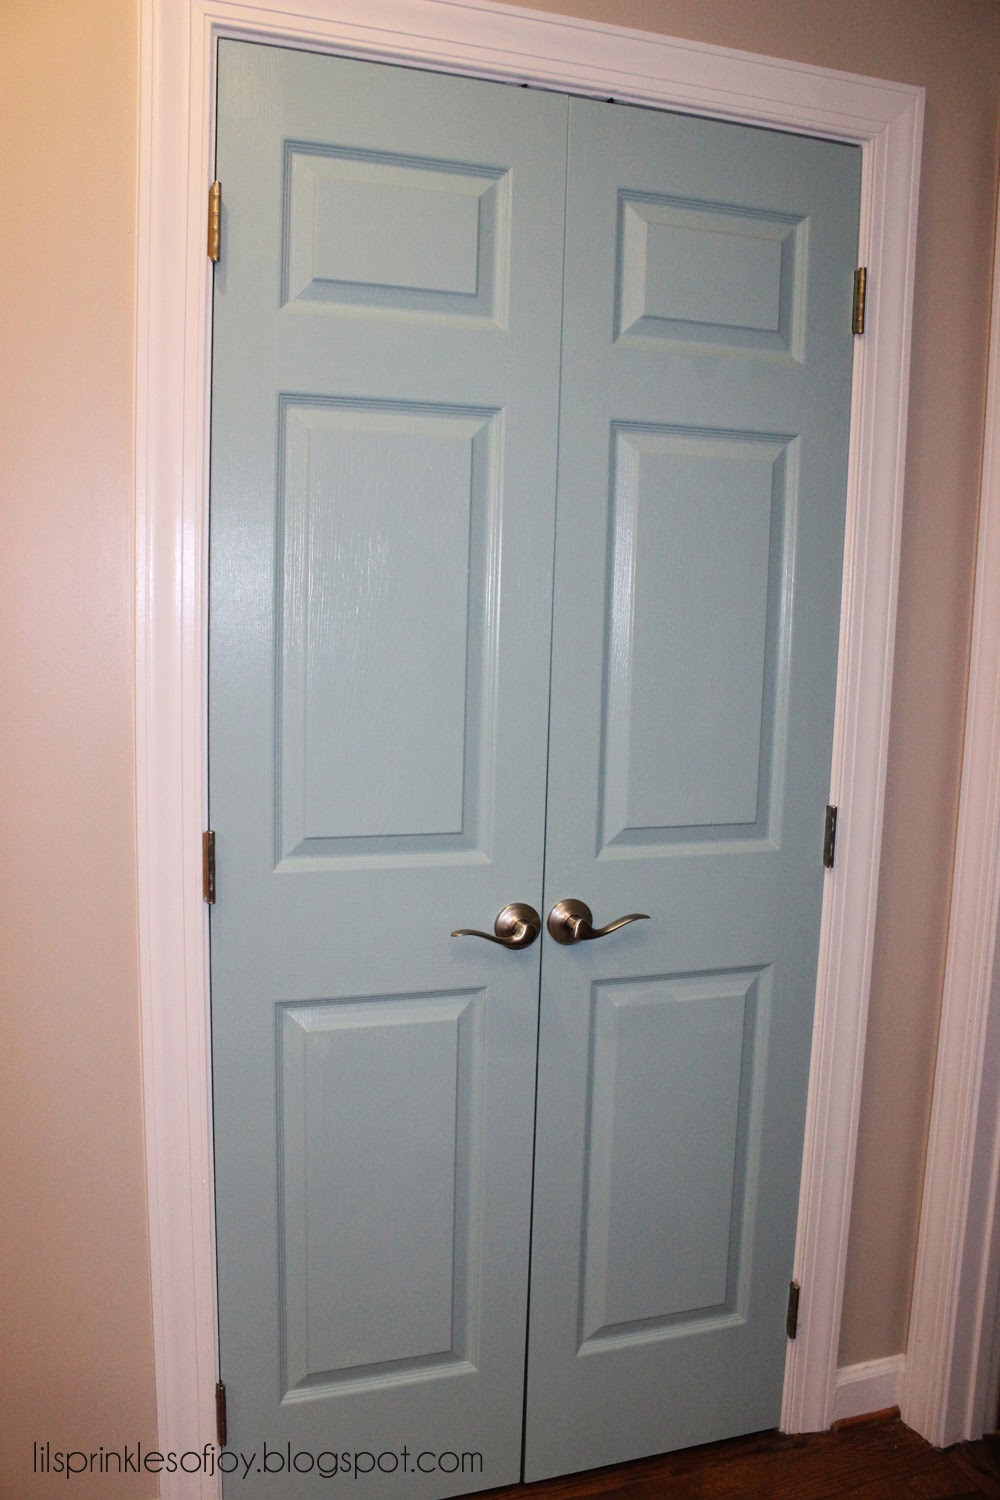 Best ideas about Home Depot Pantry Door
. Save or Pin Lil Sprinkles of Joy Painted Pantry Door Now.